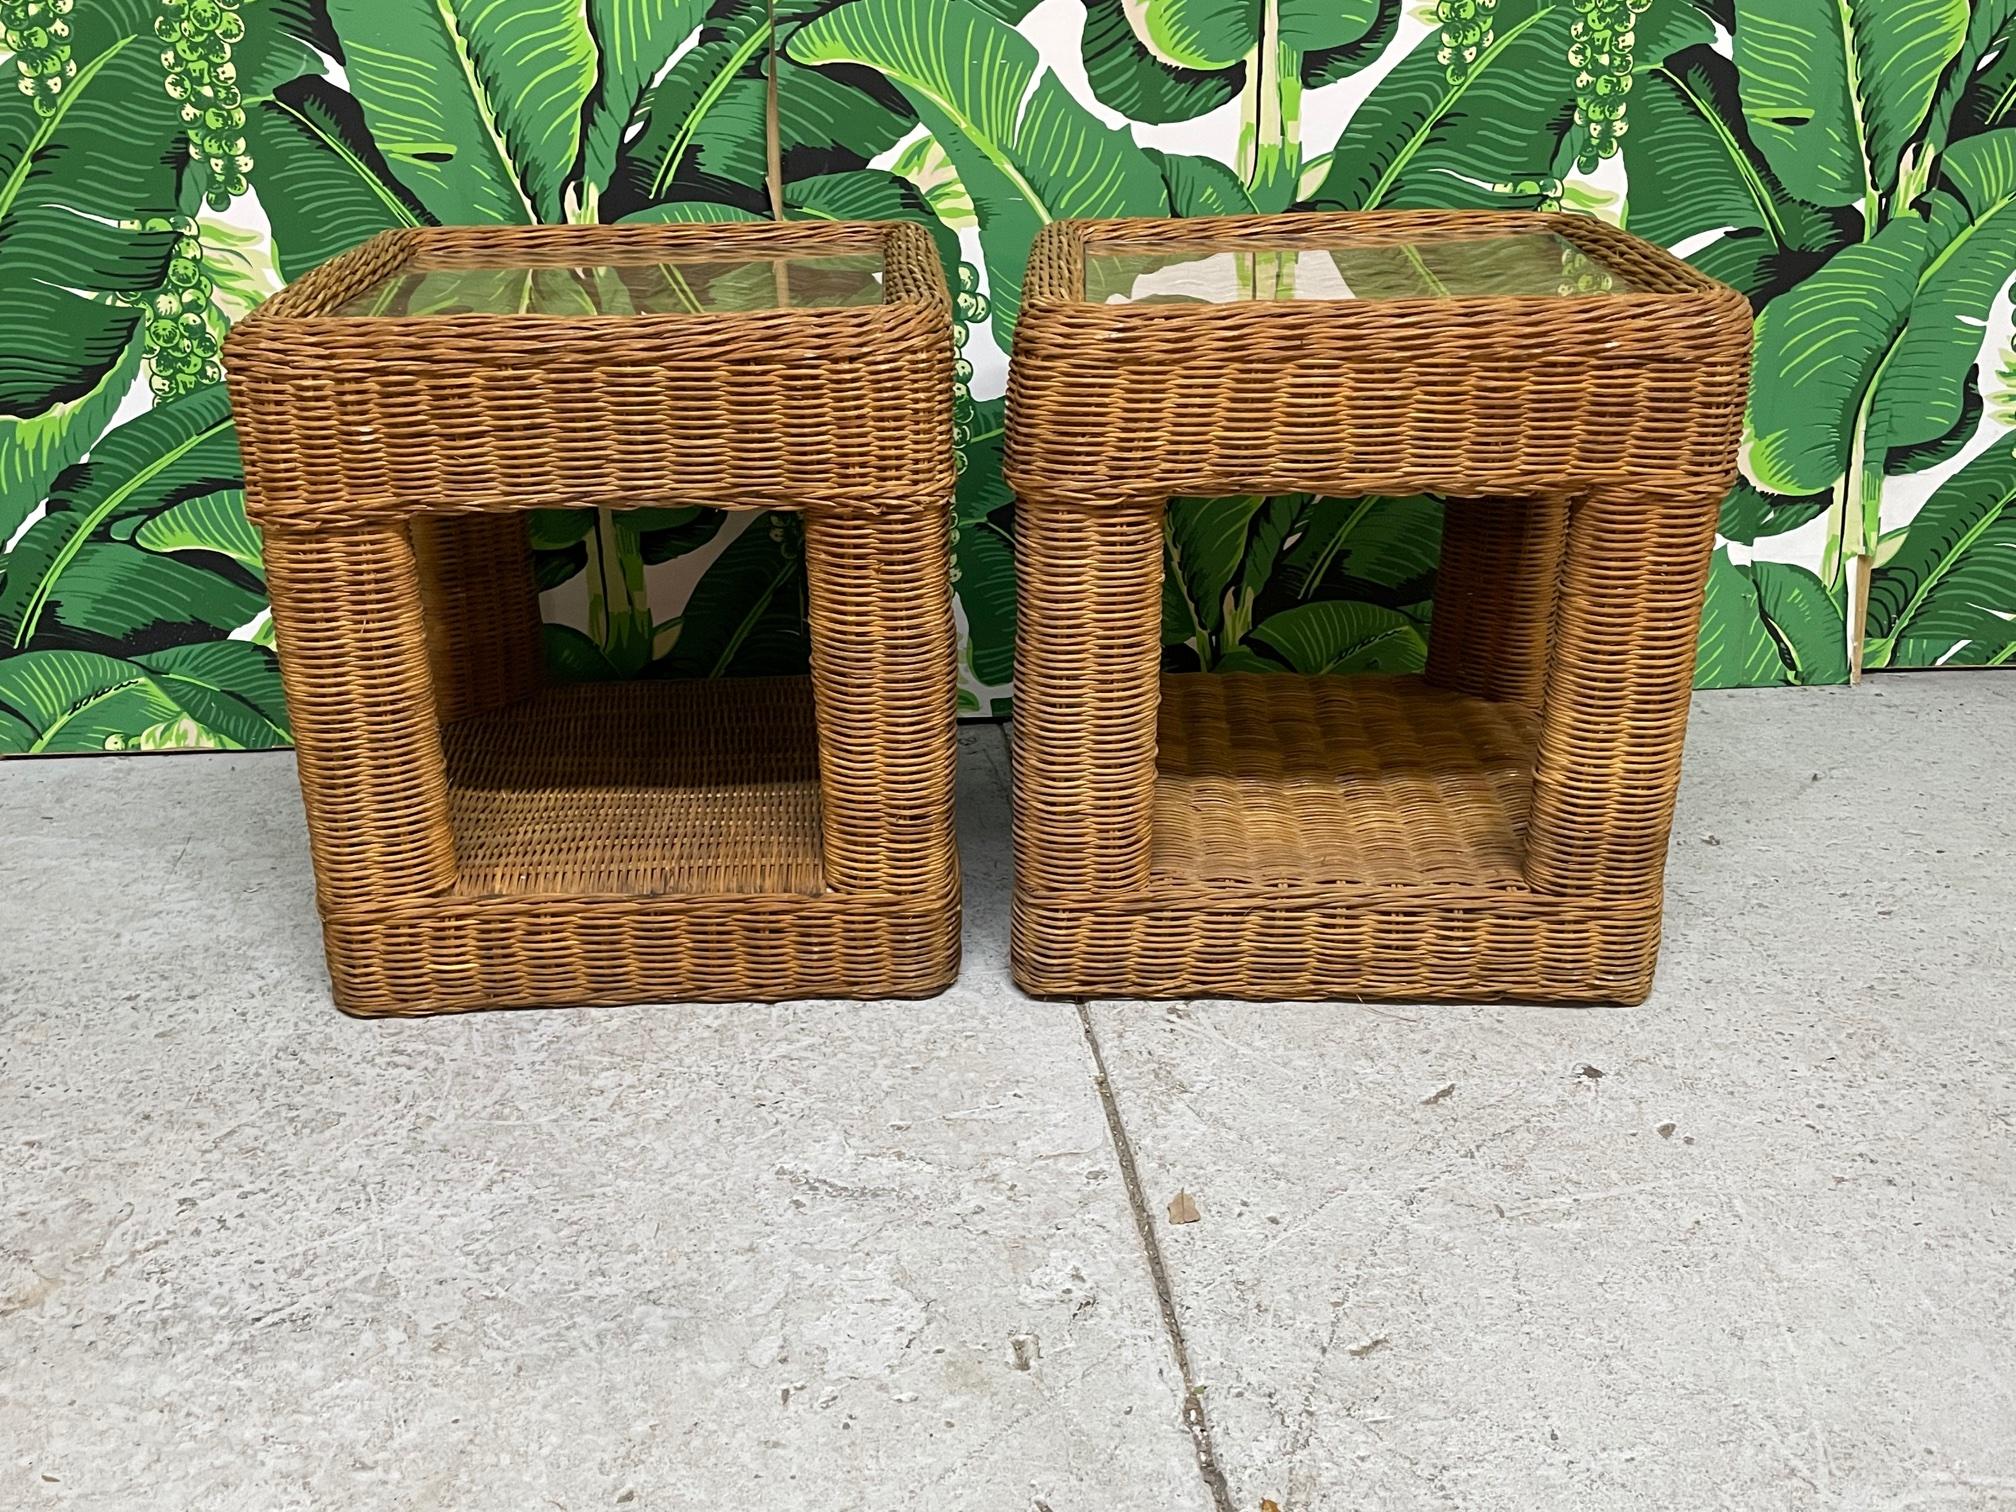 Pair of vintage wicker nightstands feature inset glass tops and intricate woven pattern. Originally purchased in 1970 in the Philippines. Could also be used as end or side tables. Good condition with only minor imperfections consistent with age.